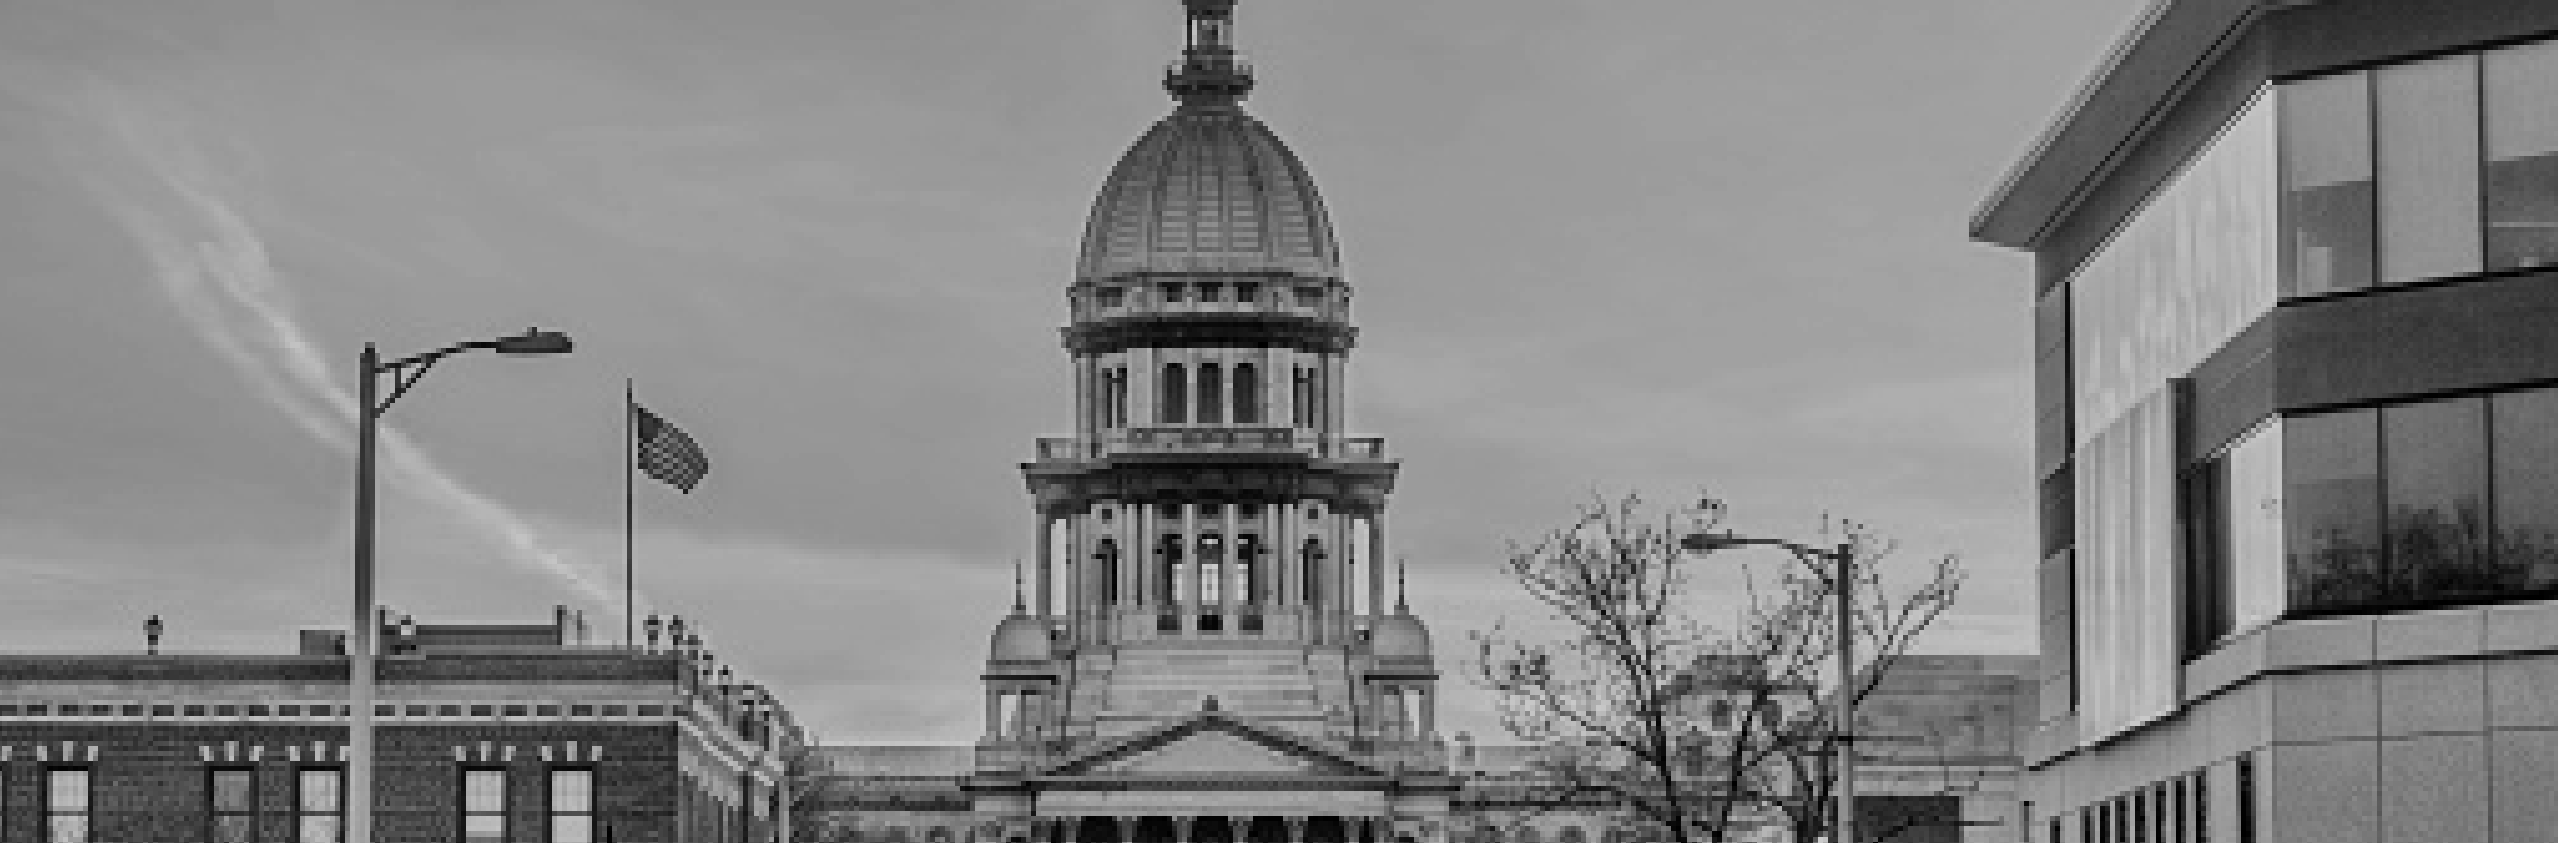 Image of Illinois capitol building